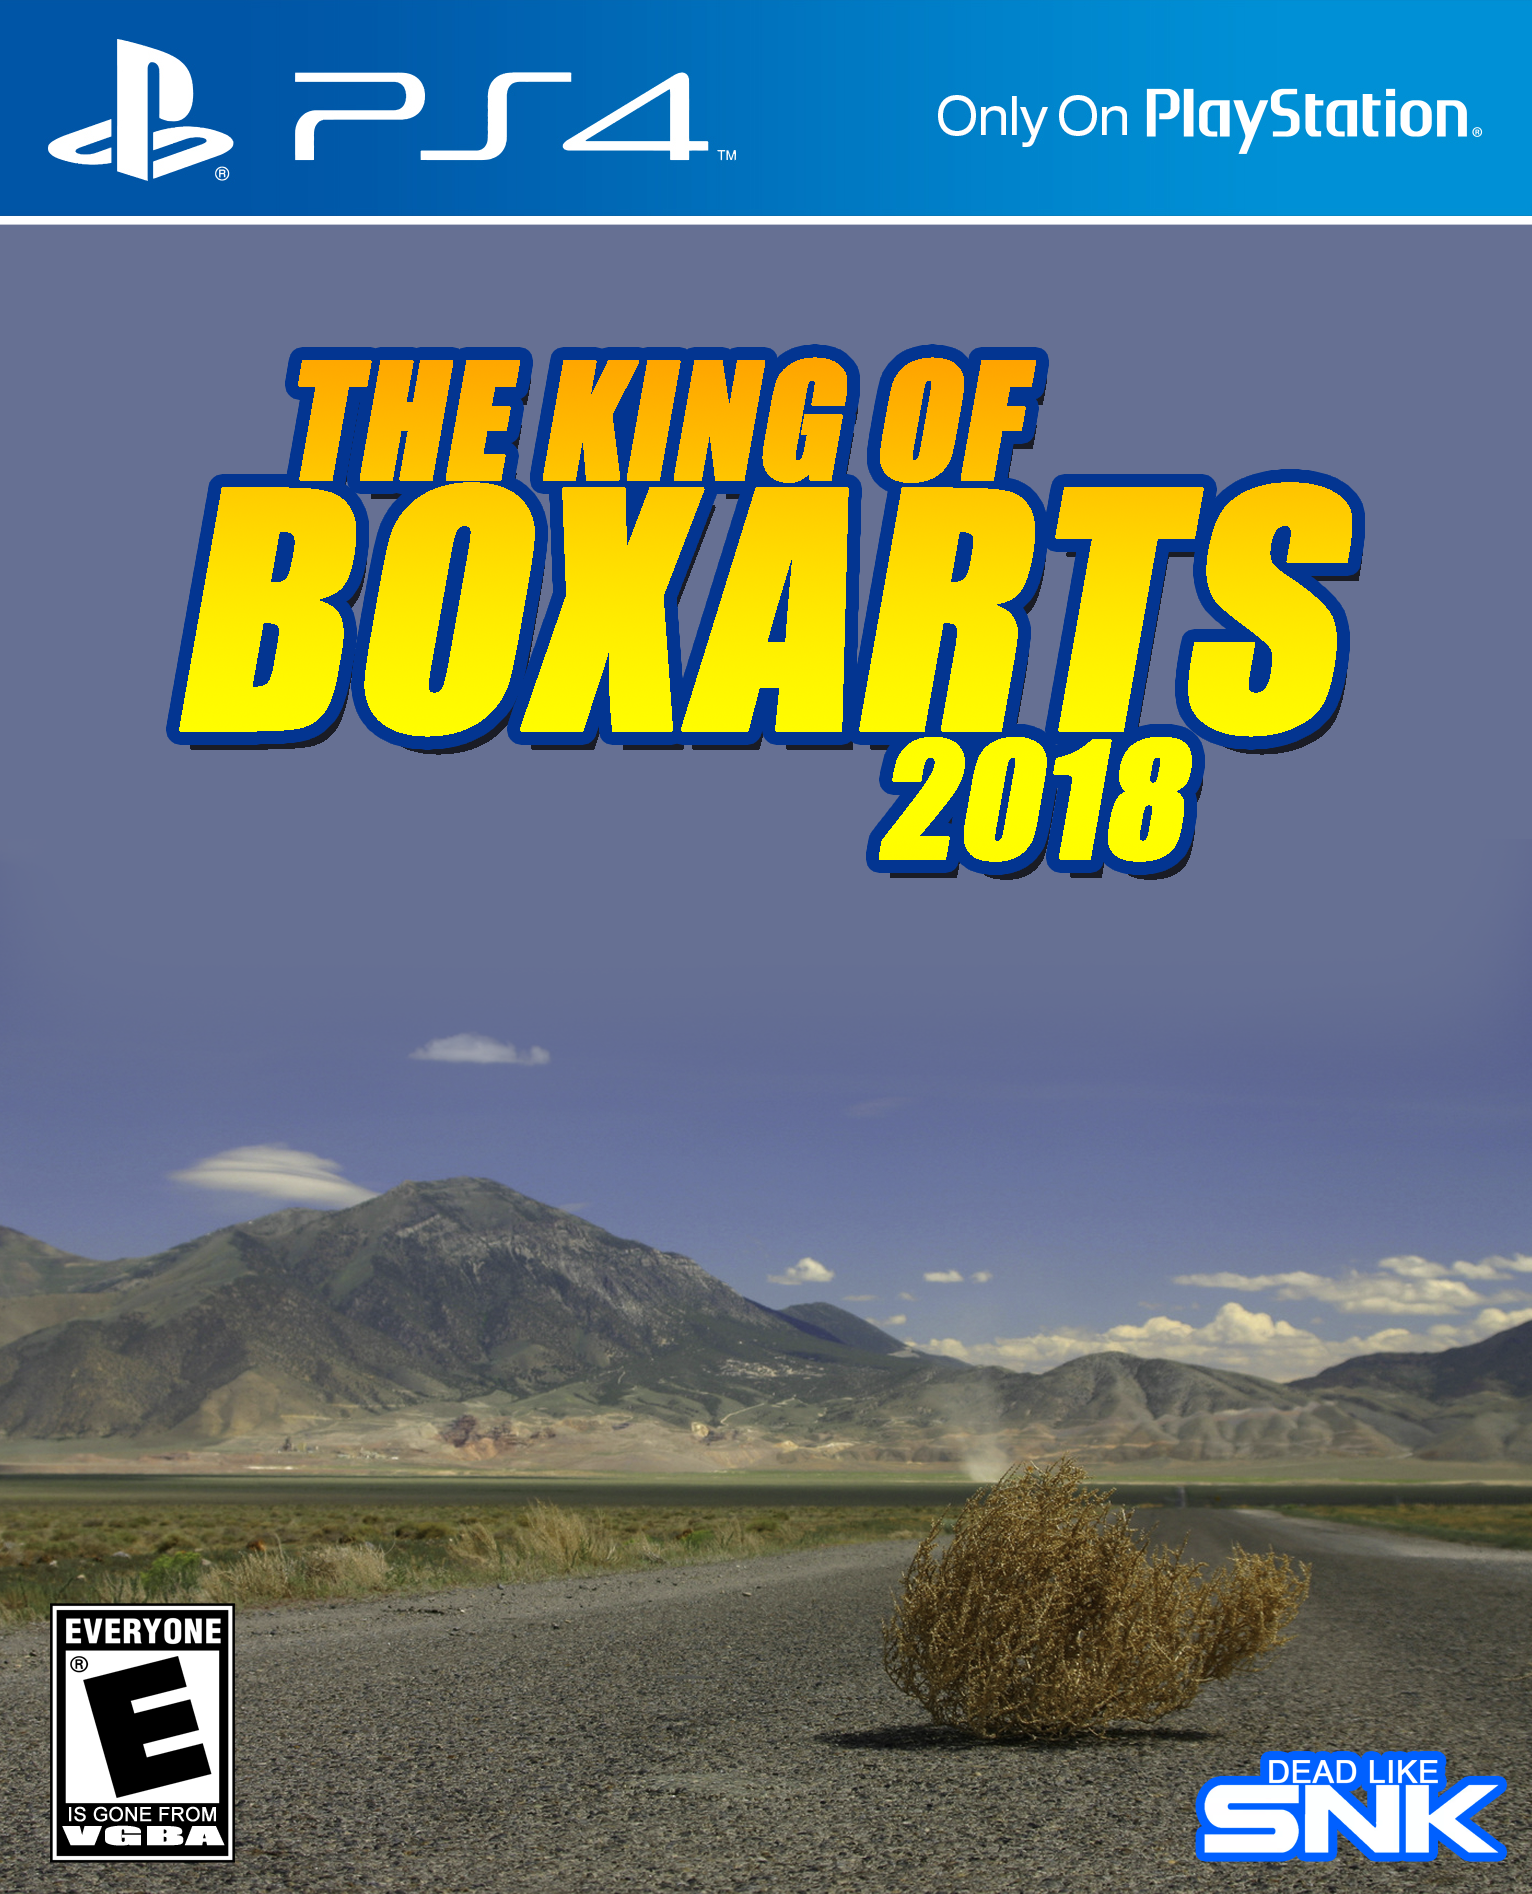 The King of Boxarts 2018 box cover